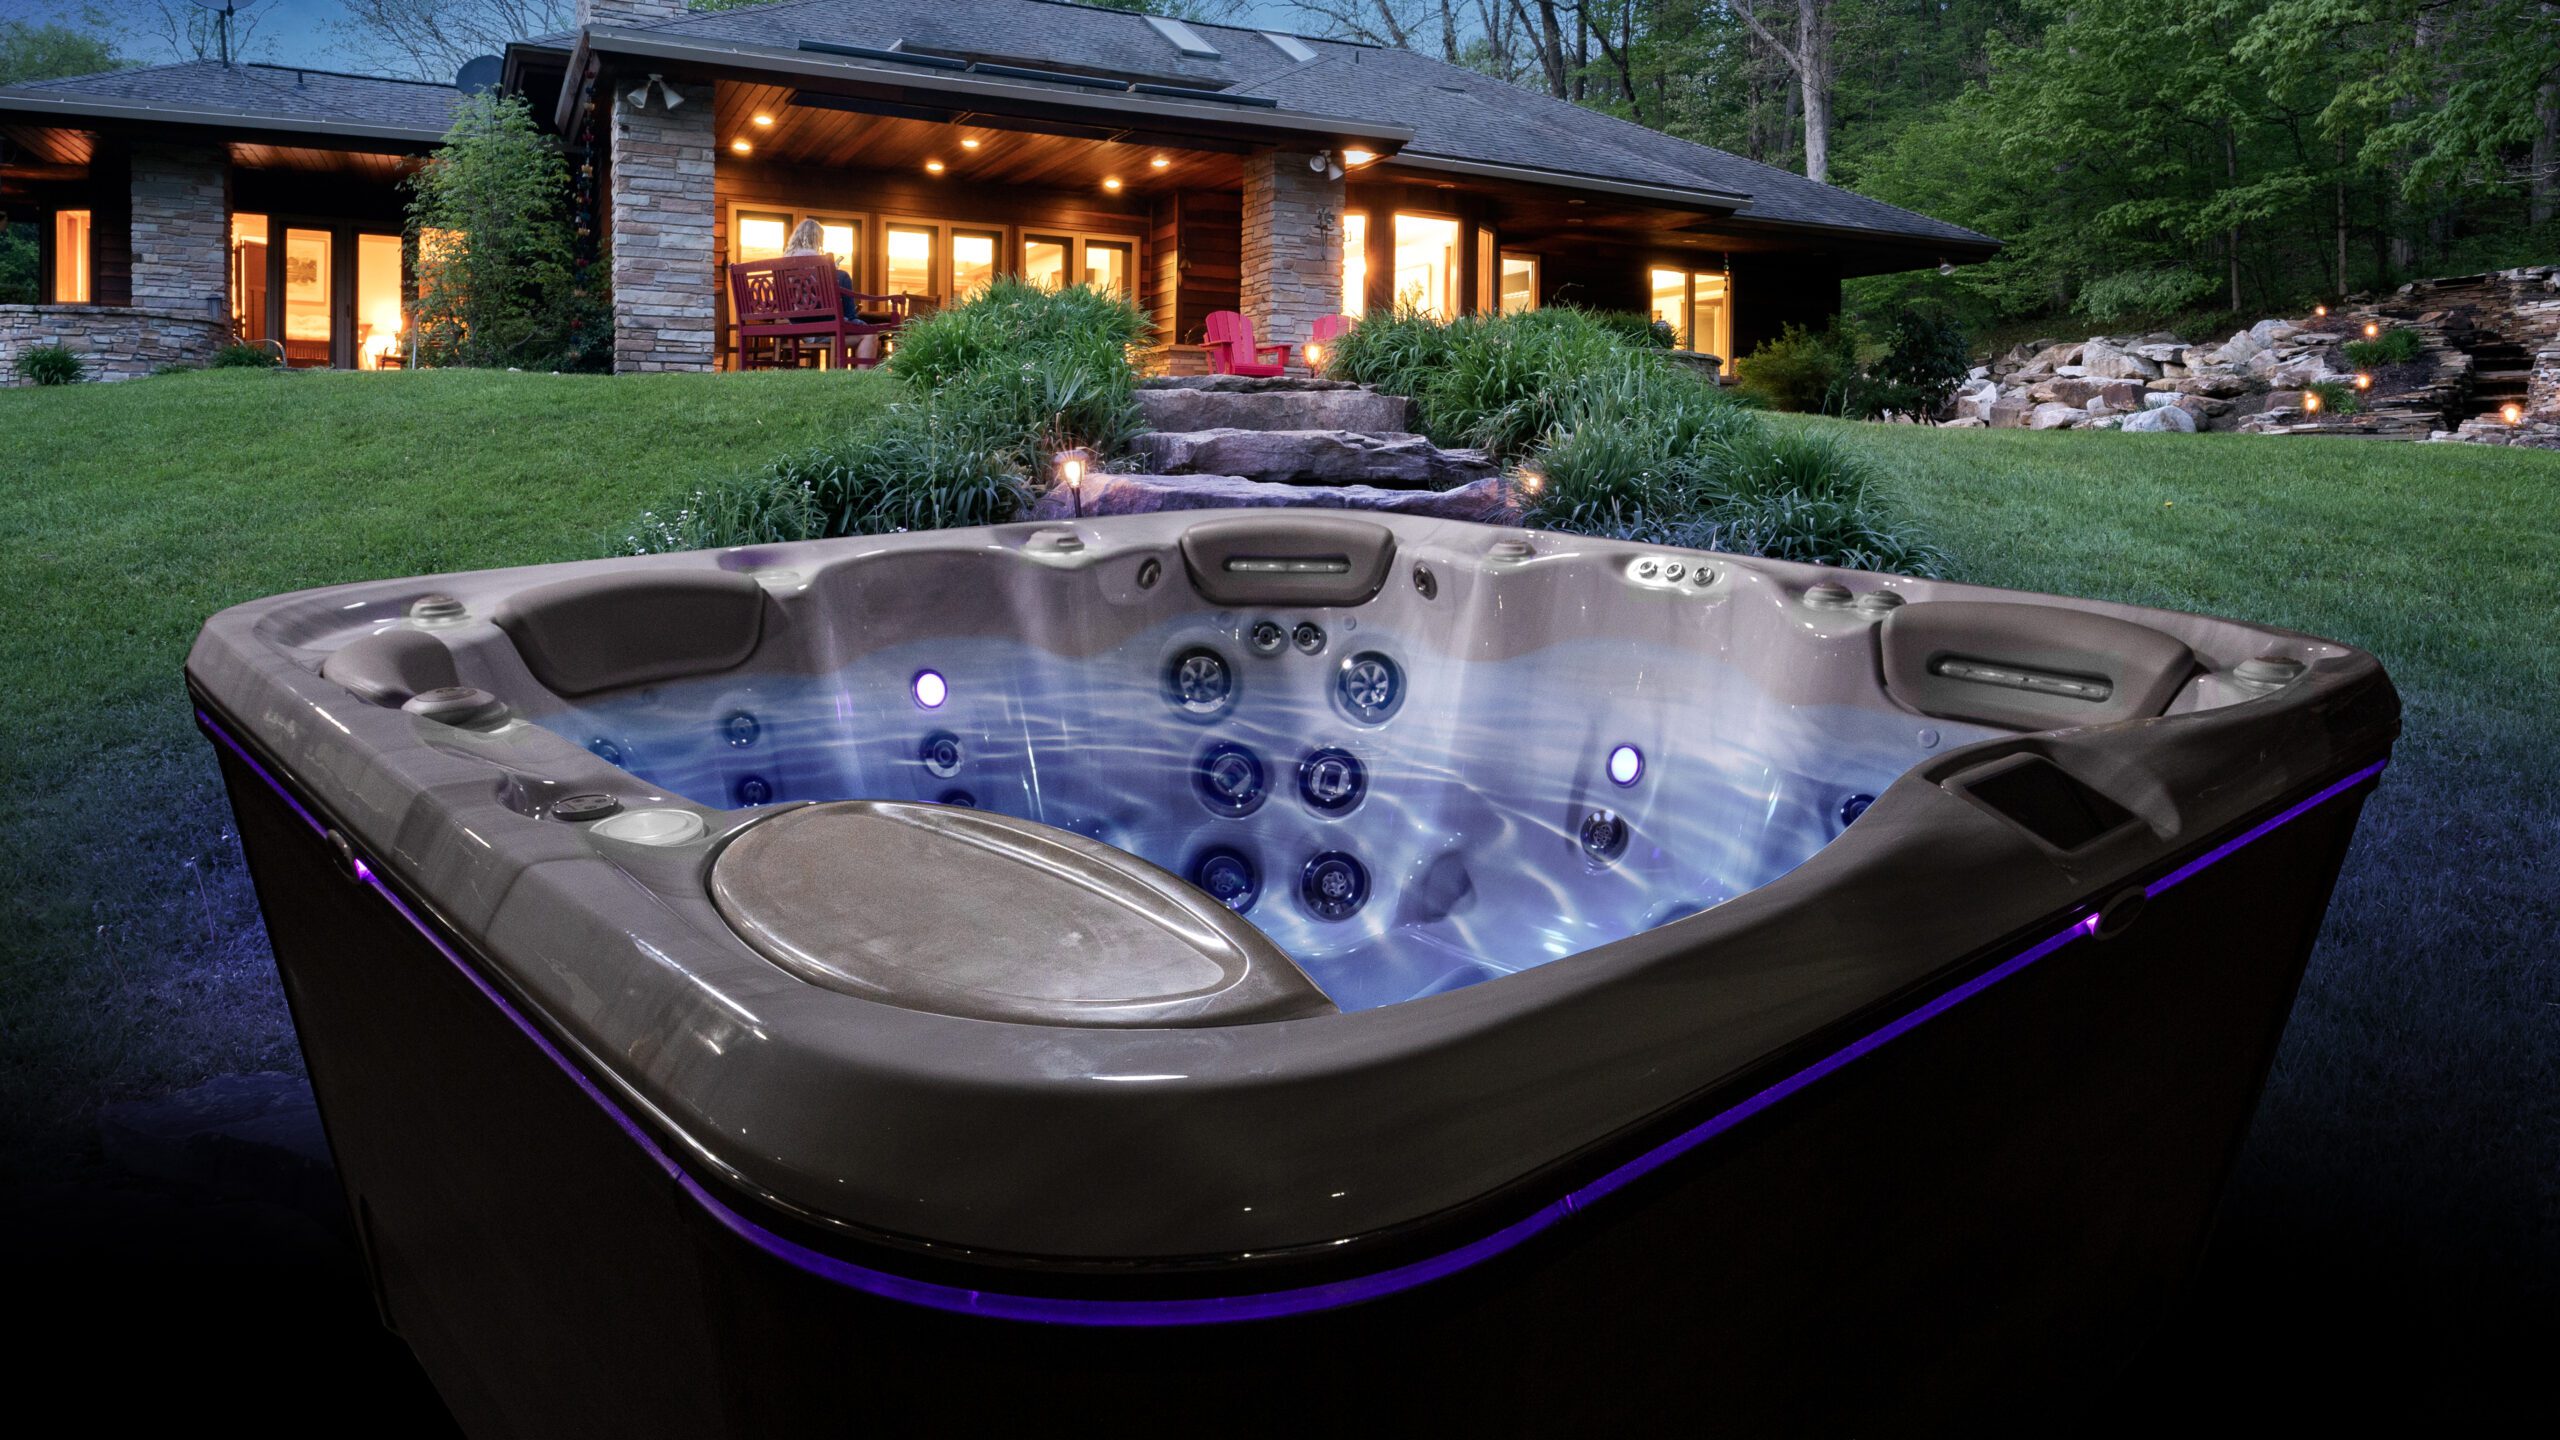 Hydropool Hot Tub with water and lights at night time - Lunar Lagoons Ohio